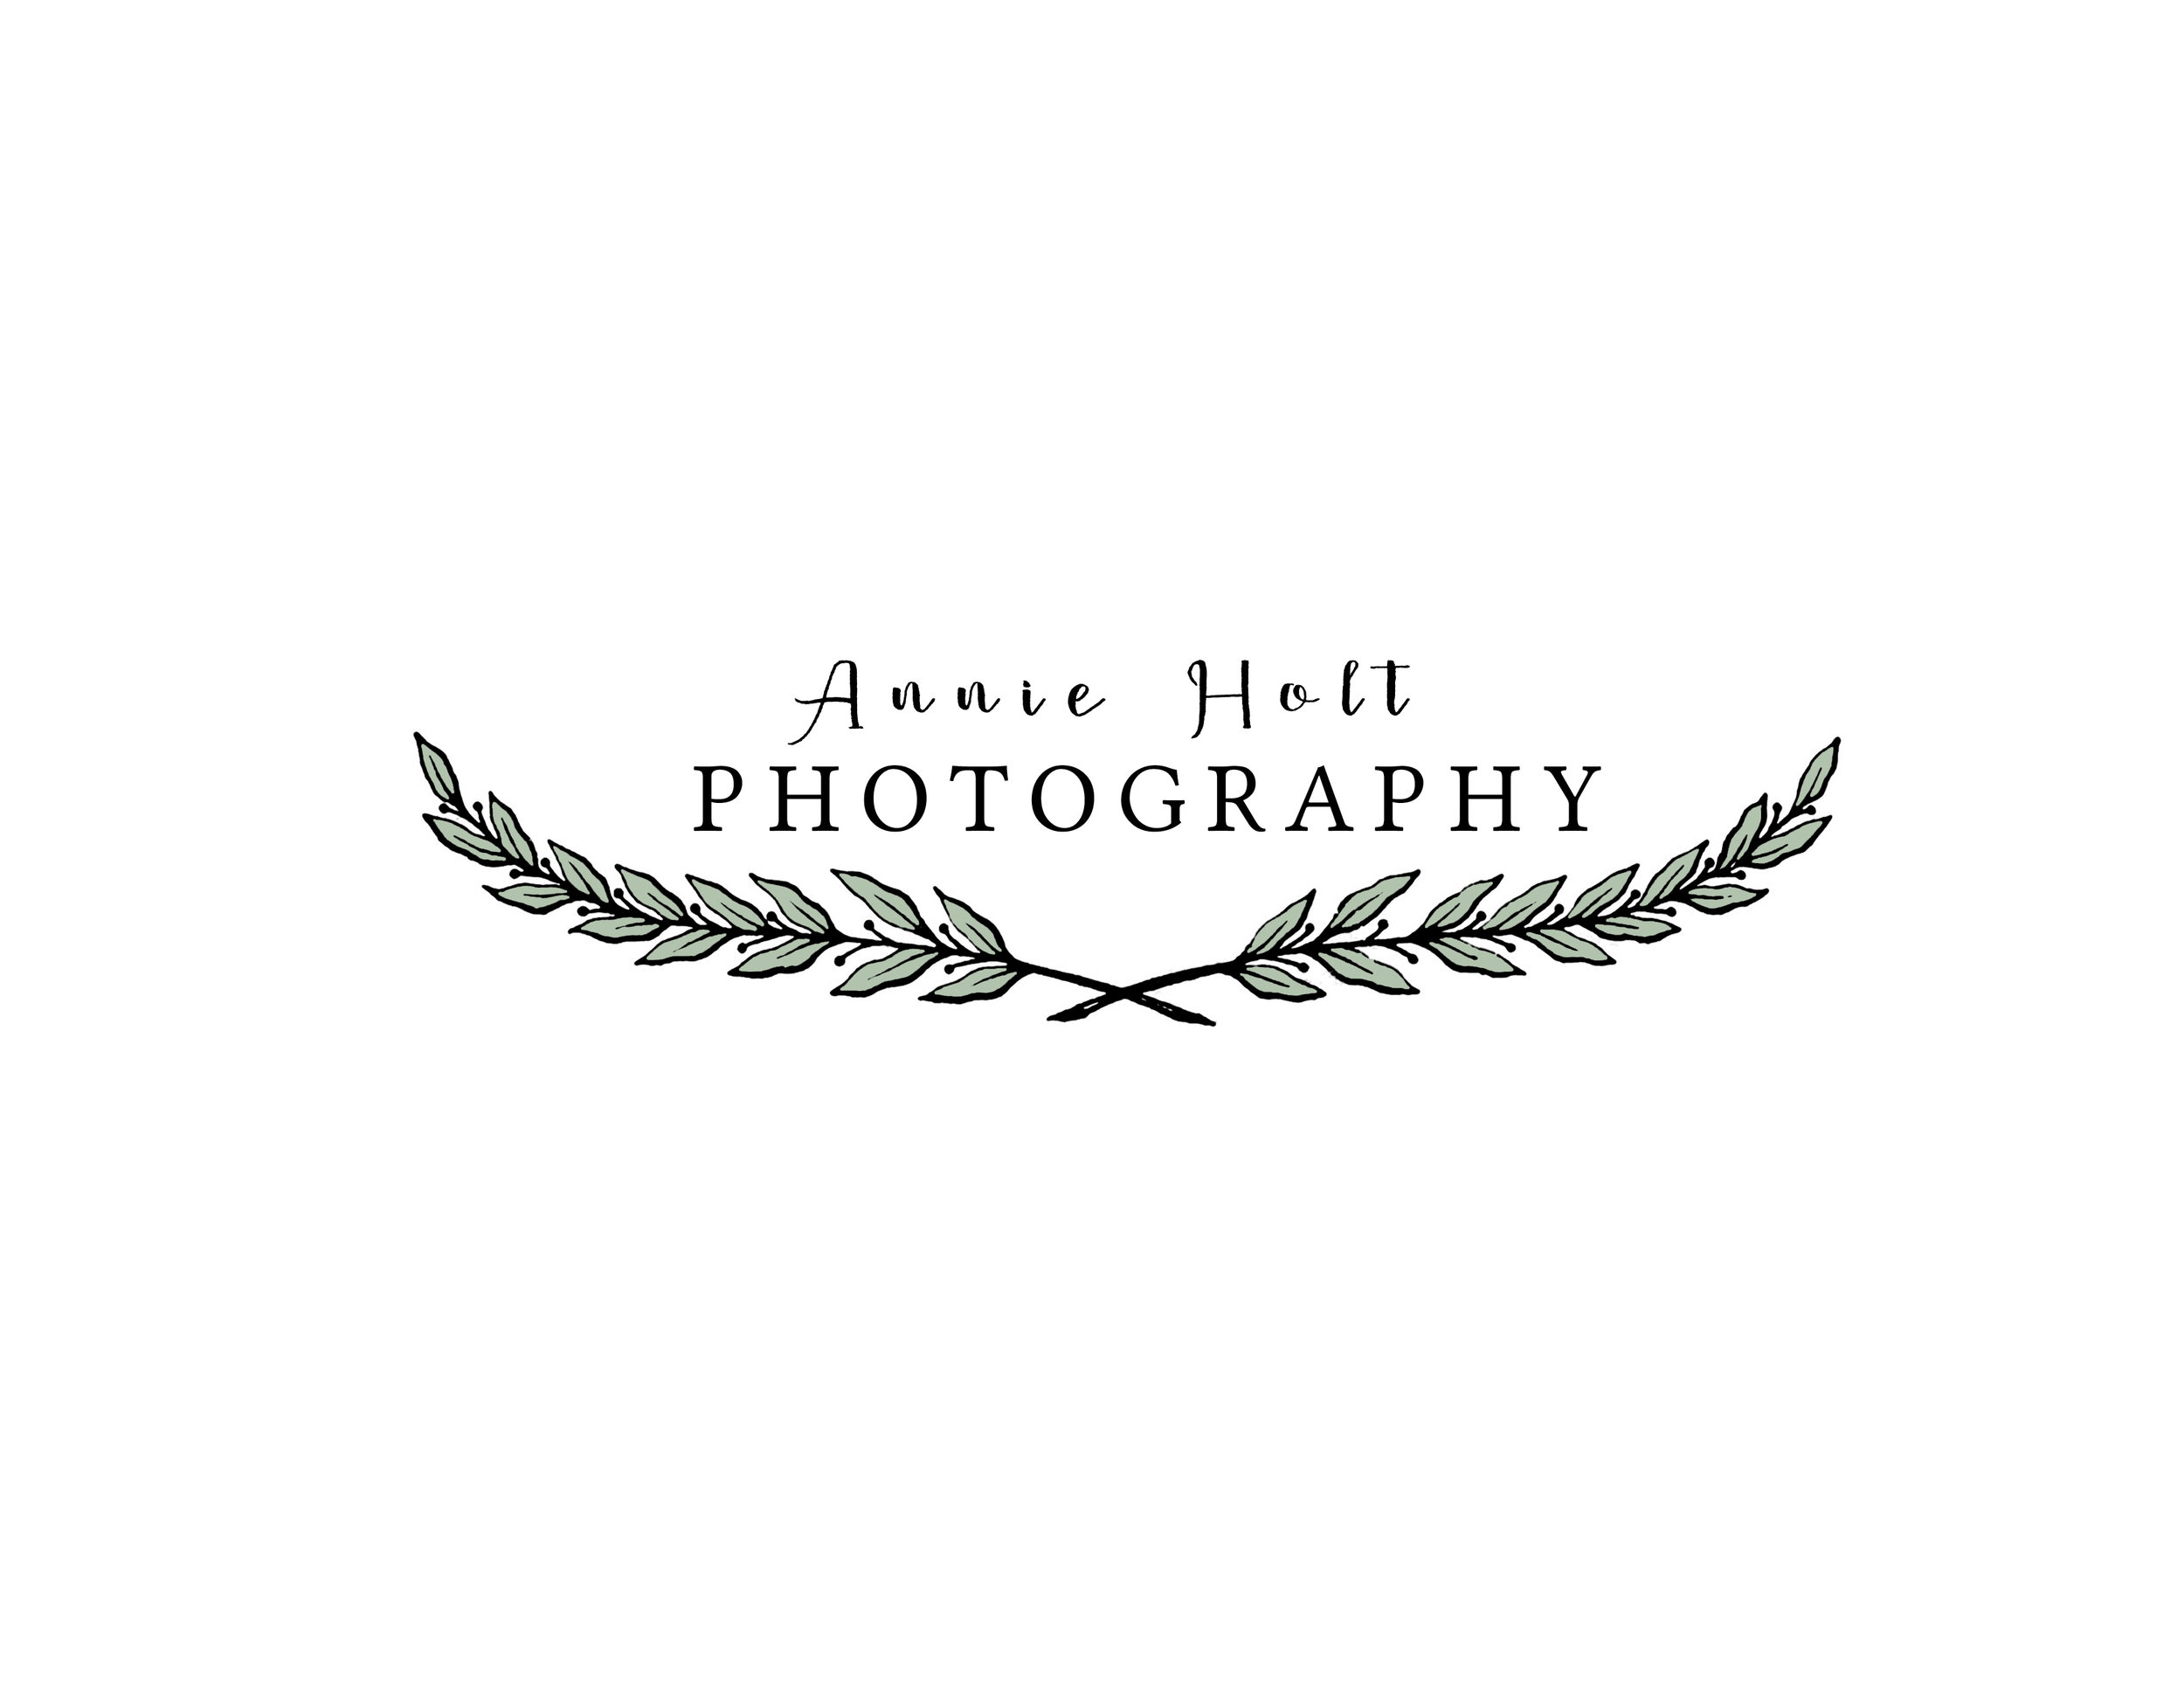 Annie Holt Photography